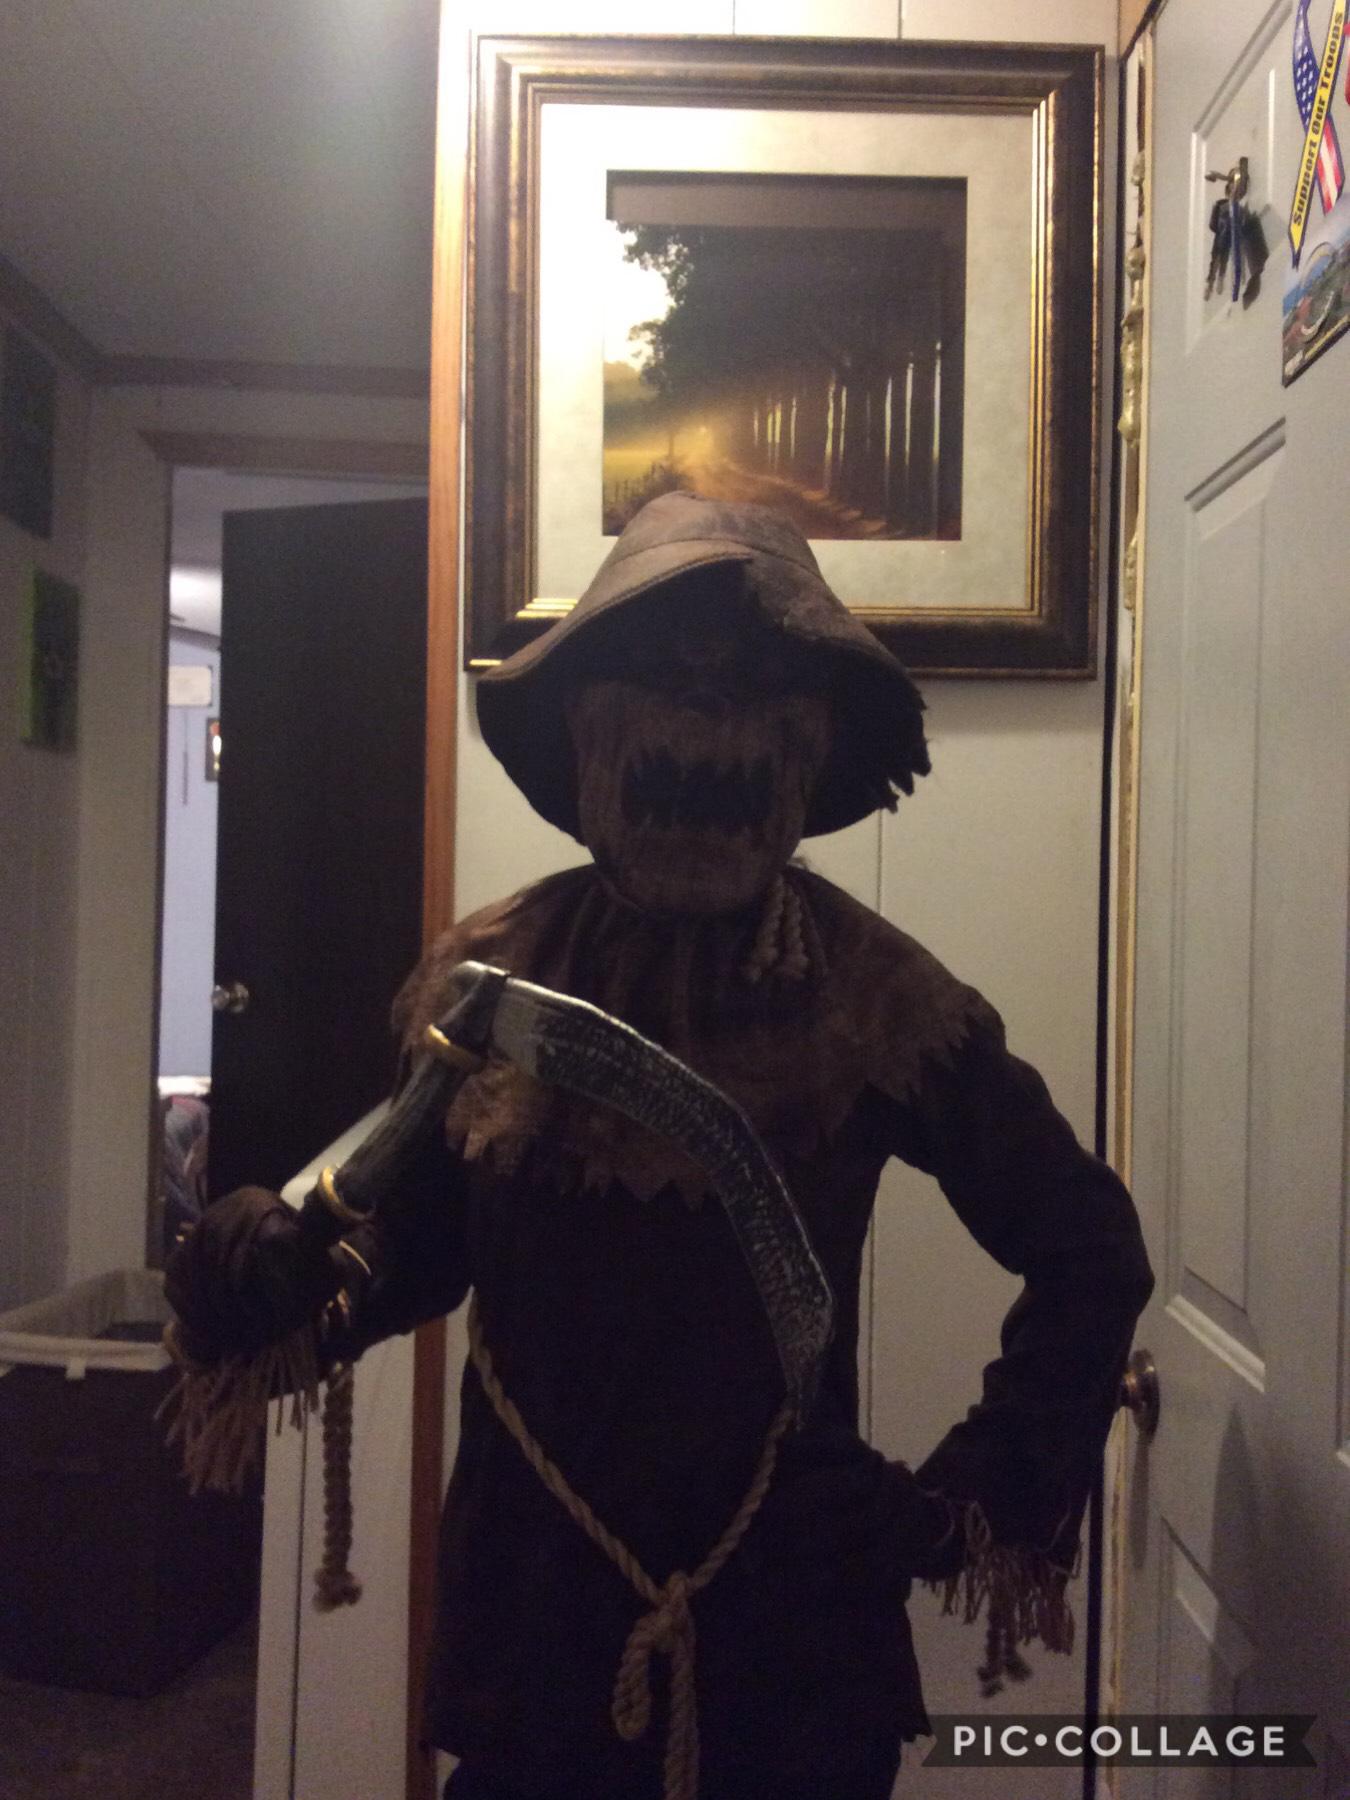 My Halloween costume. A Wicked Scarecrow. Also a boys outfit because none of the girls outfits were cool